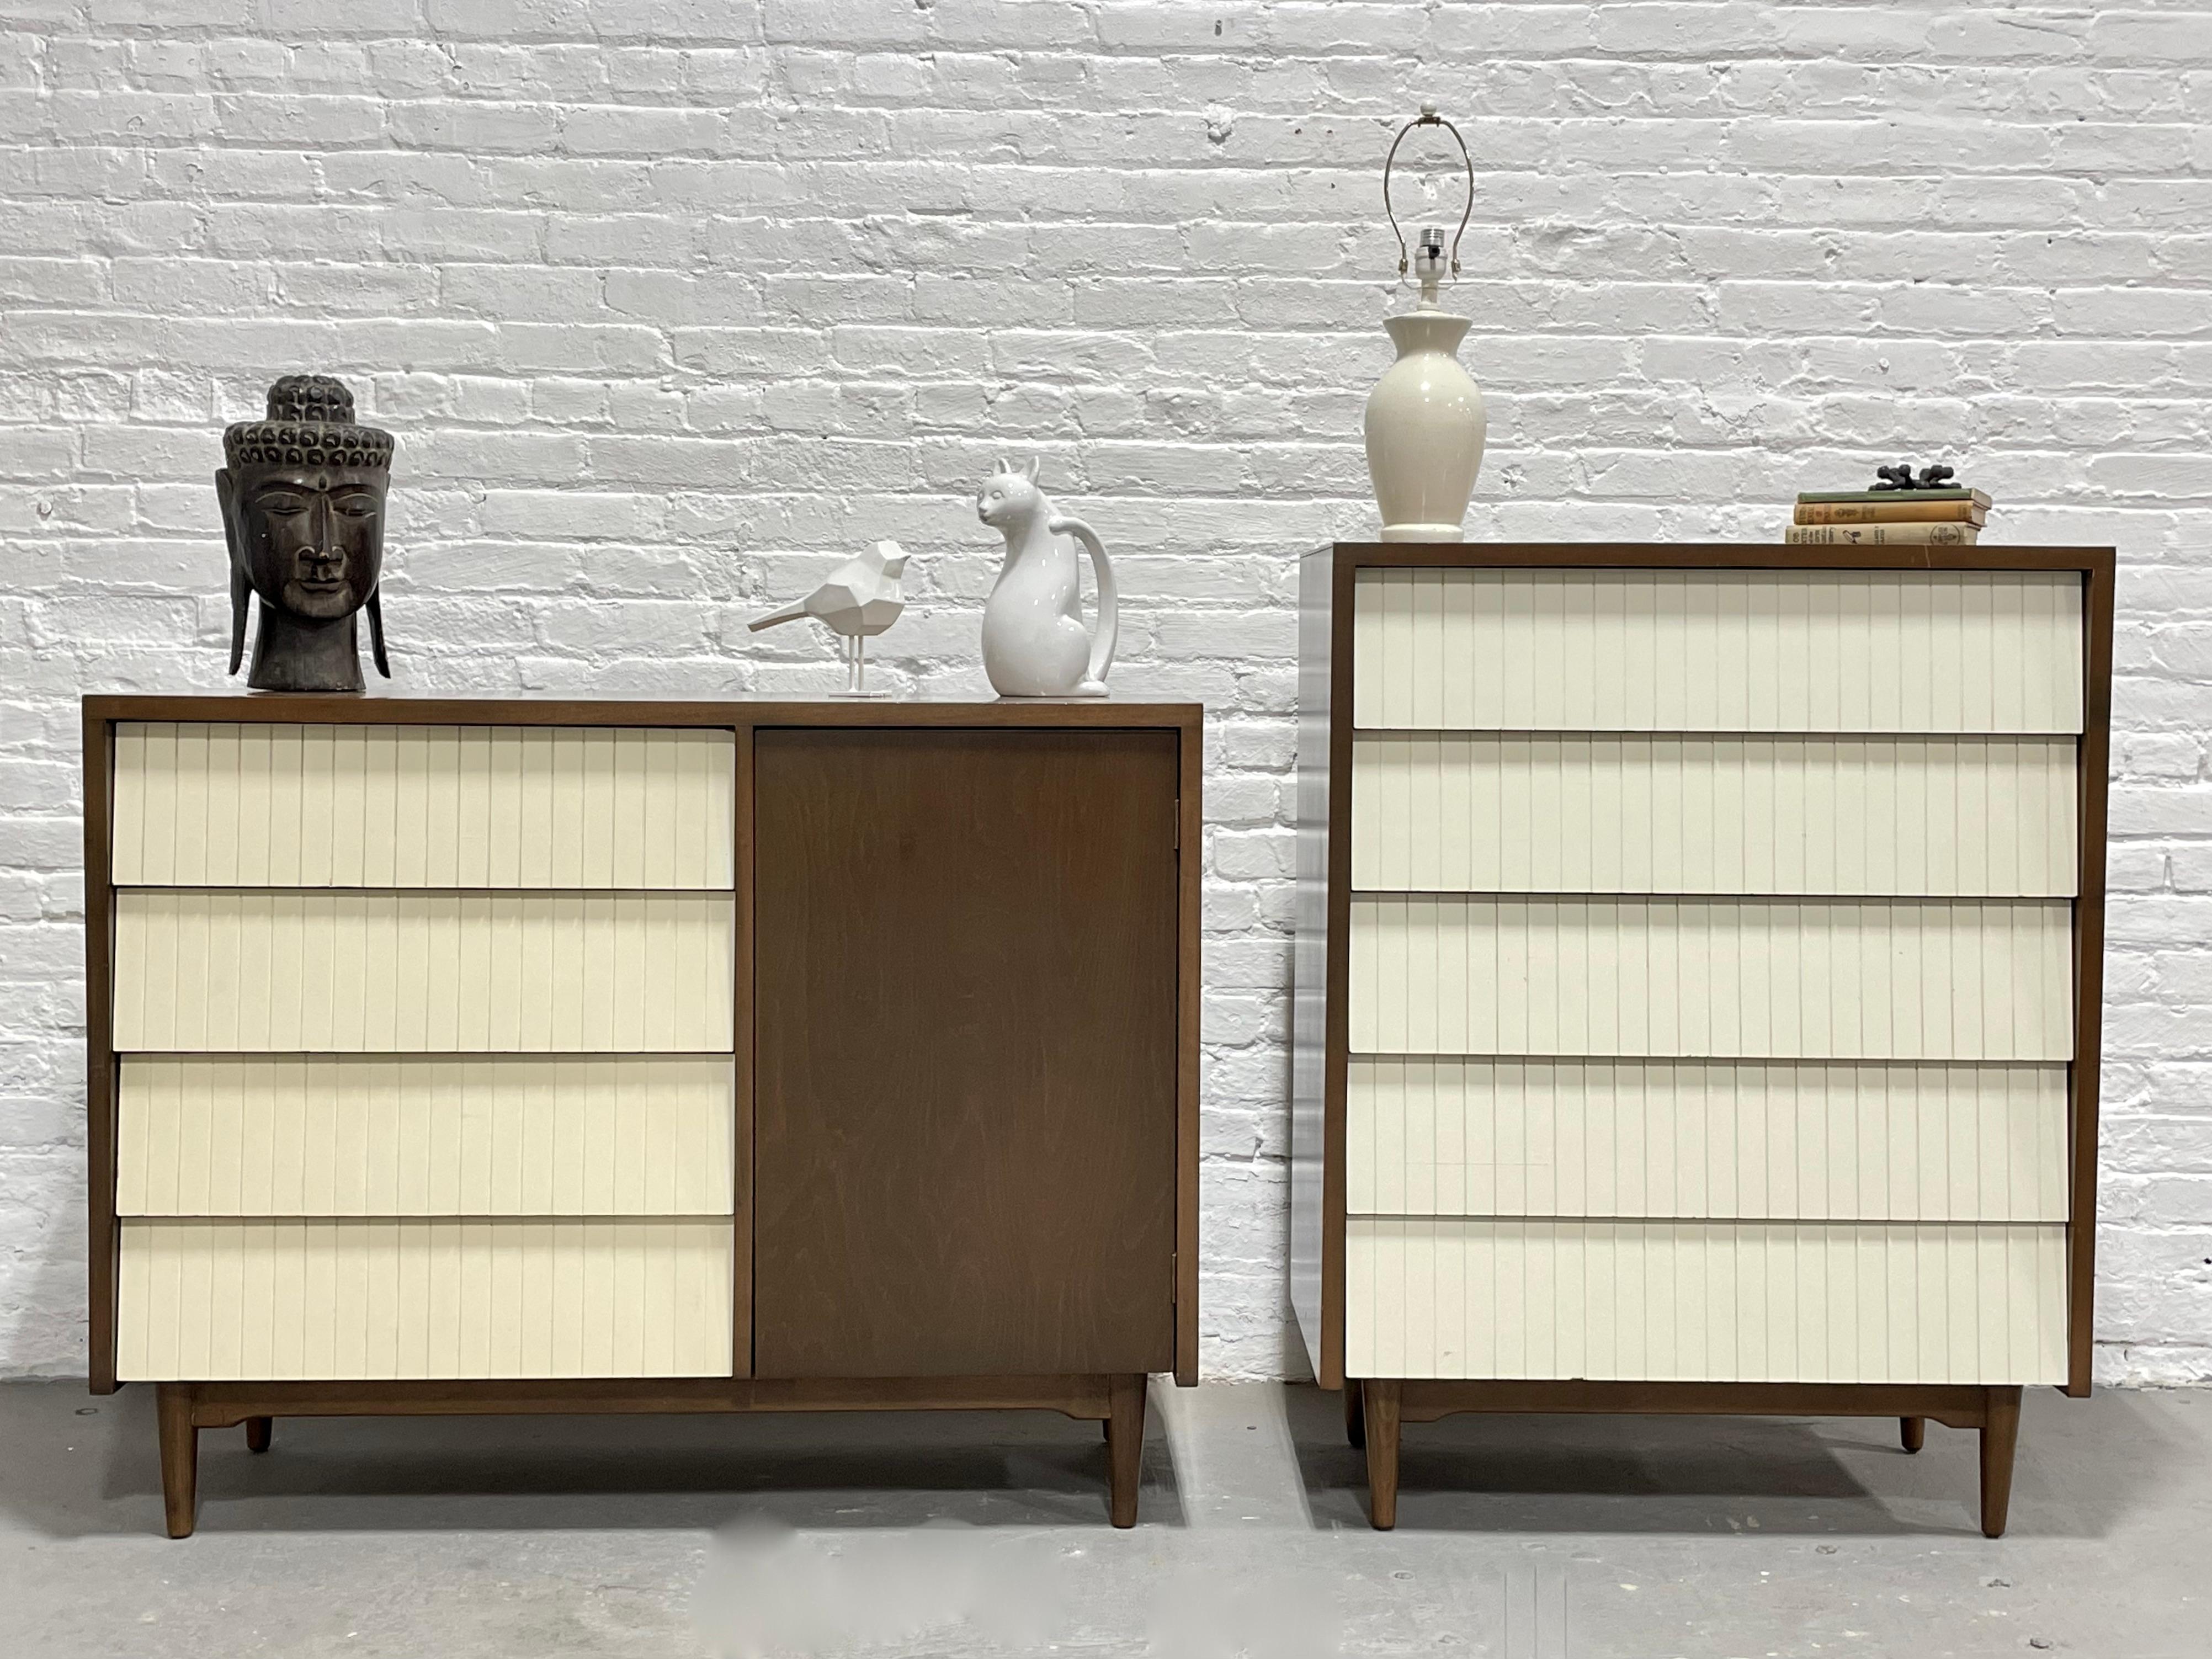 Mid-Century Modern Walnut + White Bedroom Set / Dresser by Lawrence Peabody for Child Craft, c. 1960s. Tall dresser consists of five deep and spacious drawers offering plenty of storage space. WIder dresser offers one side one side with 4 deep and